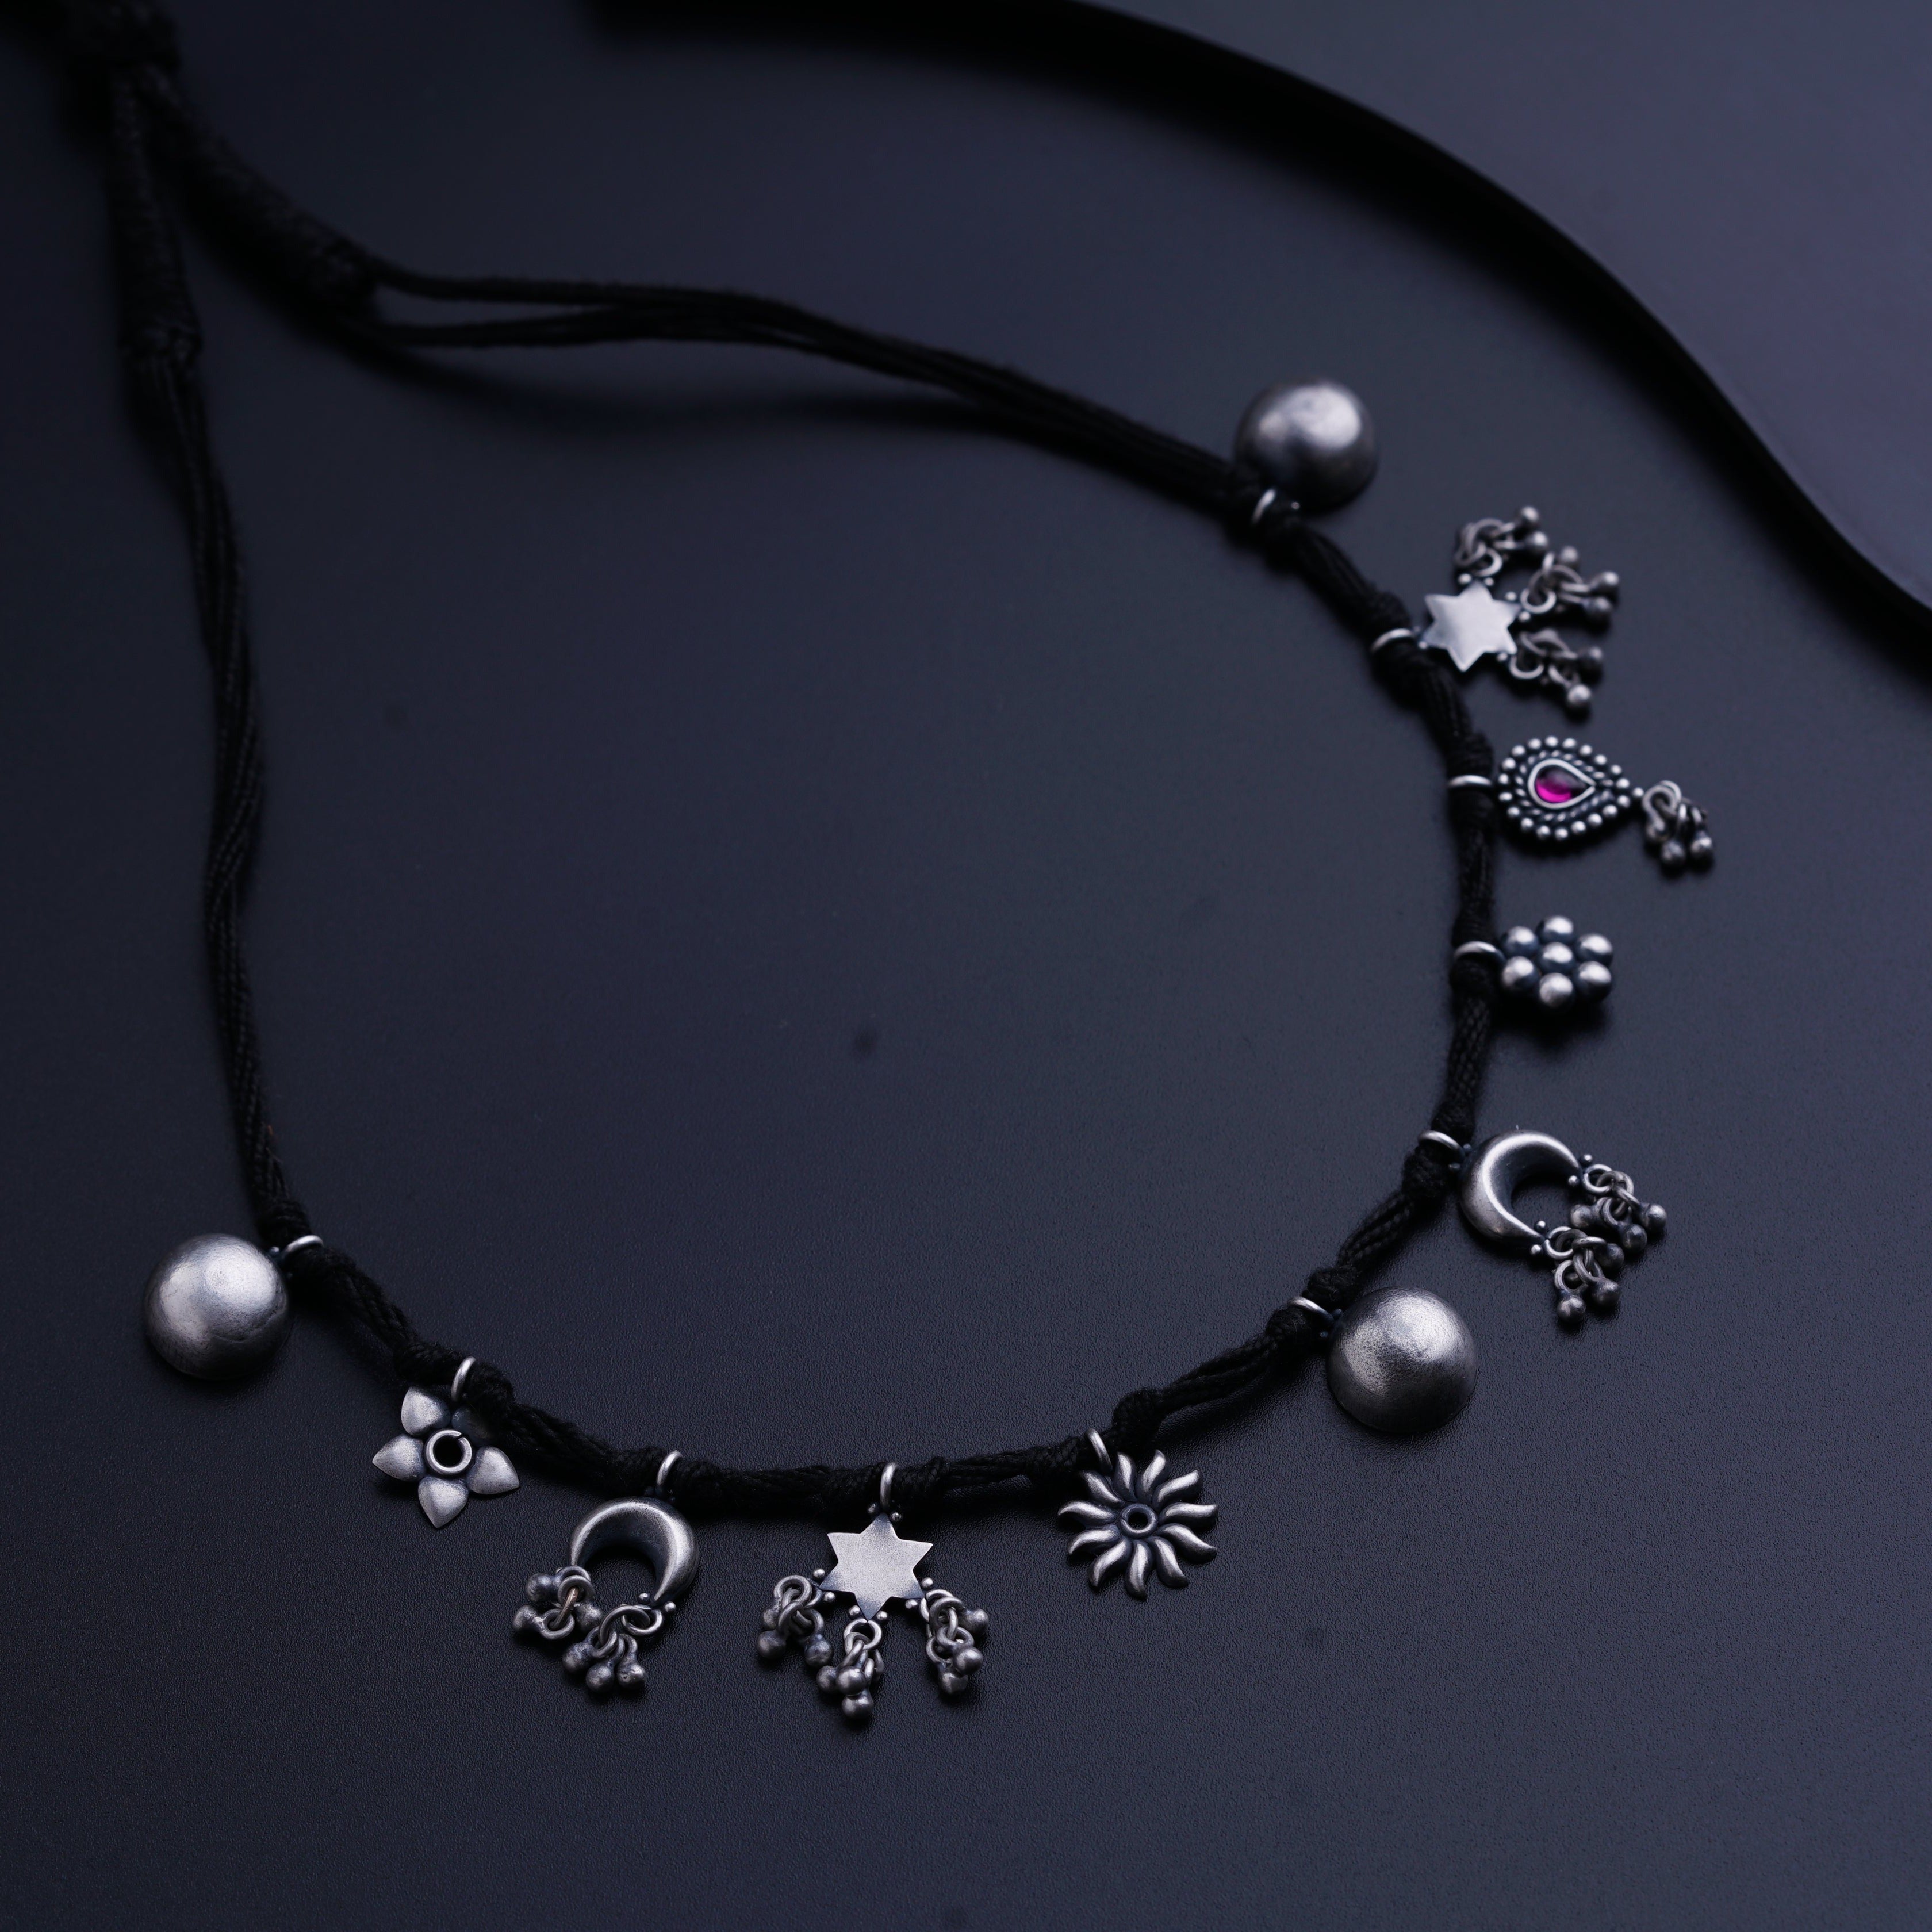 a black cord necklace with silver beads and charms